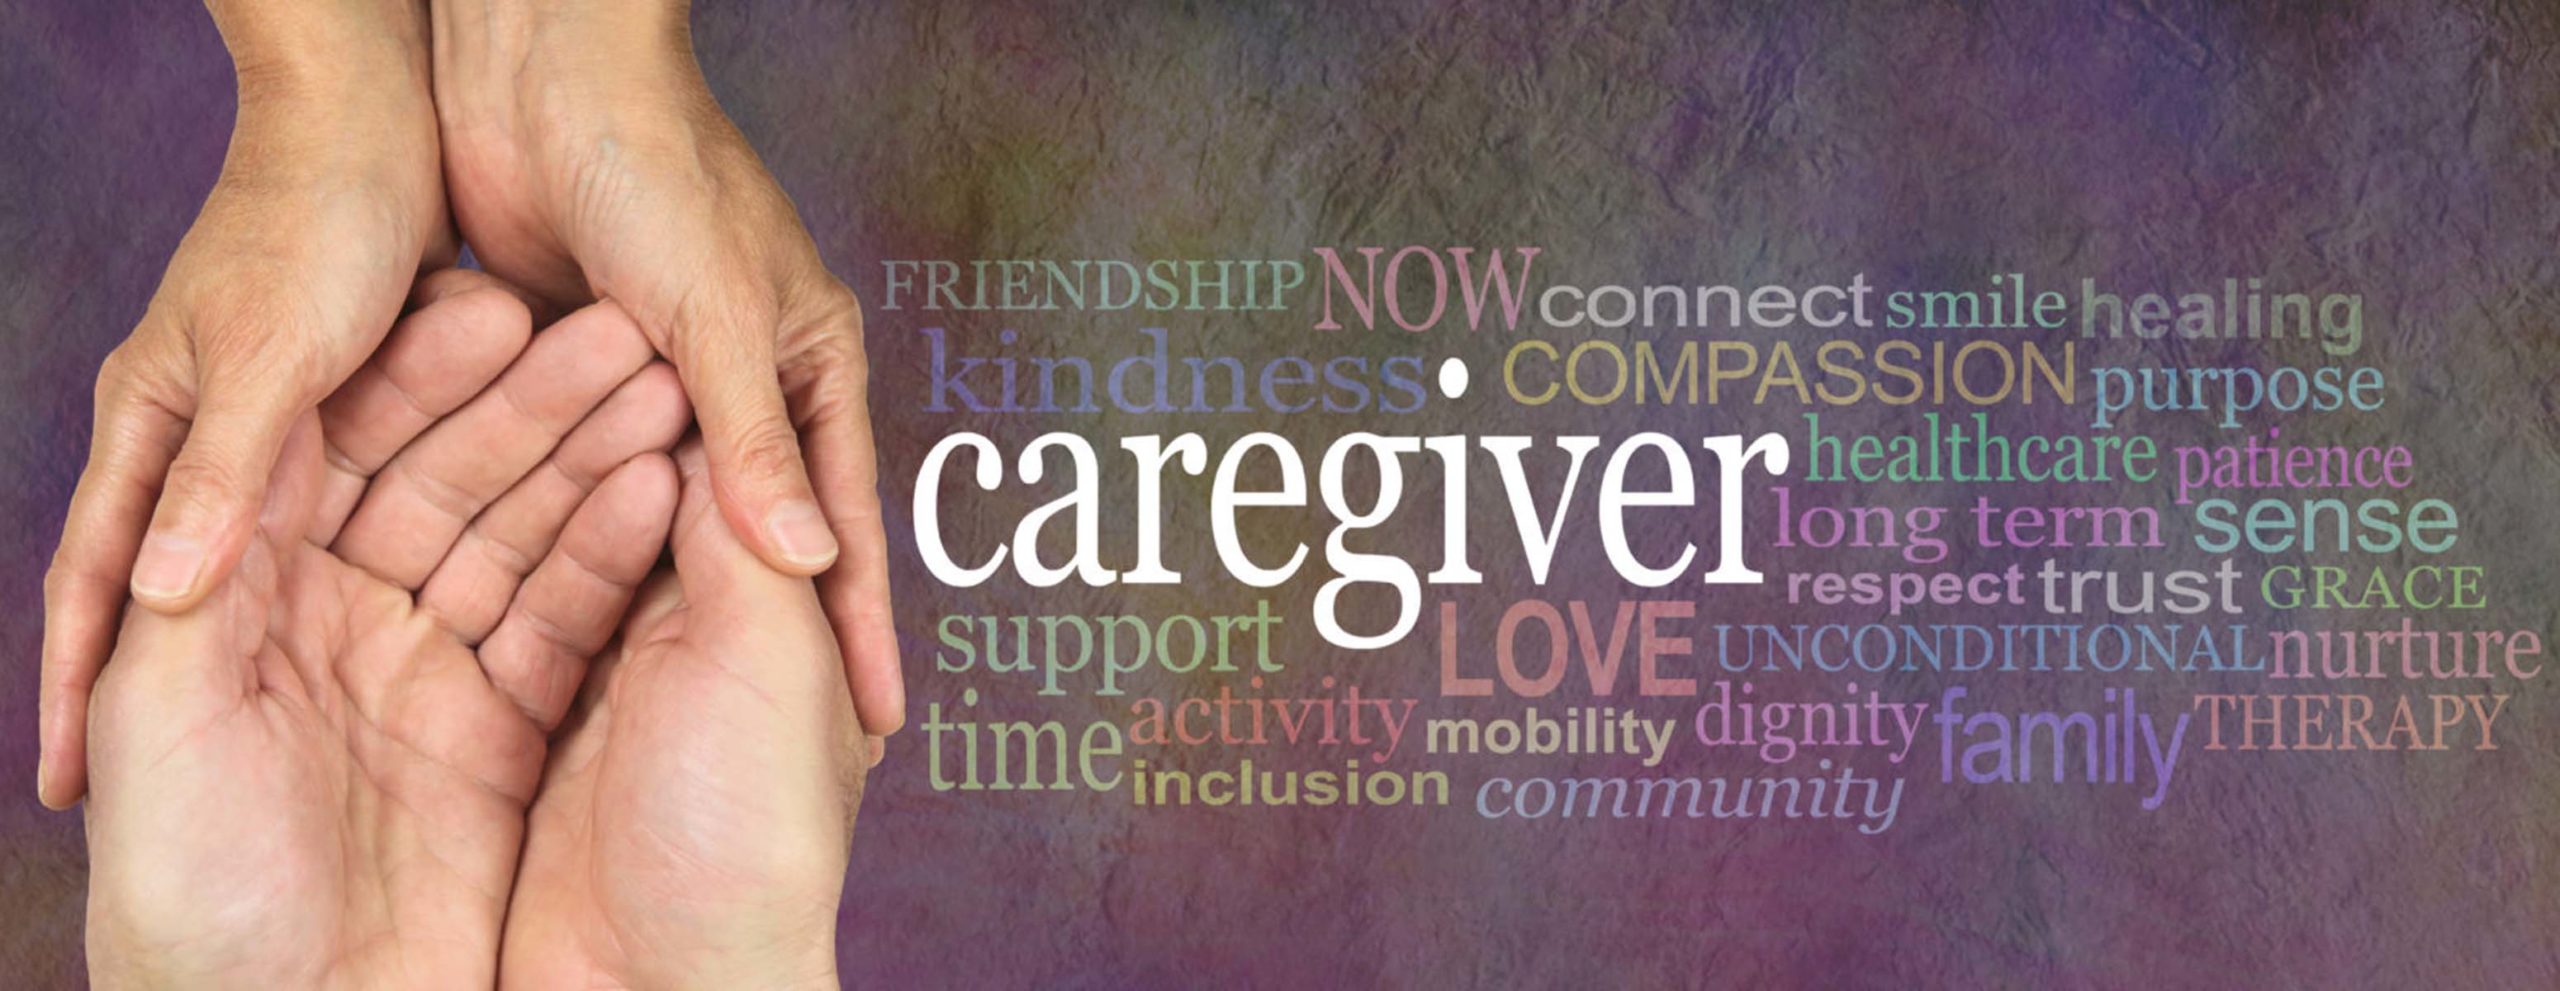 Image with associated words for caregiver.